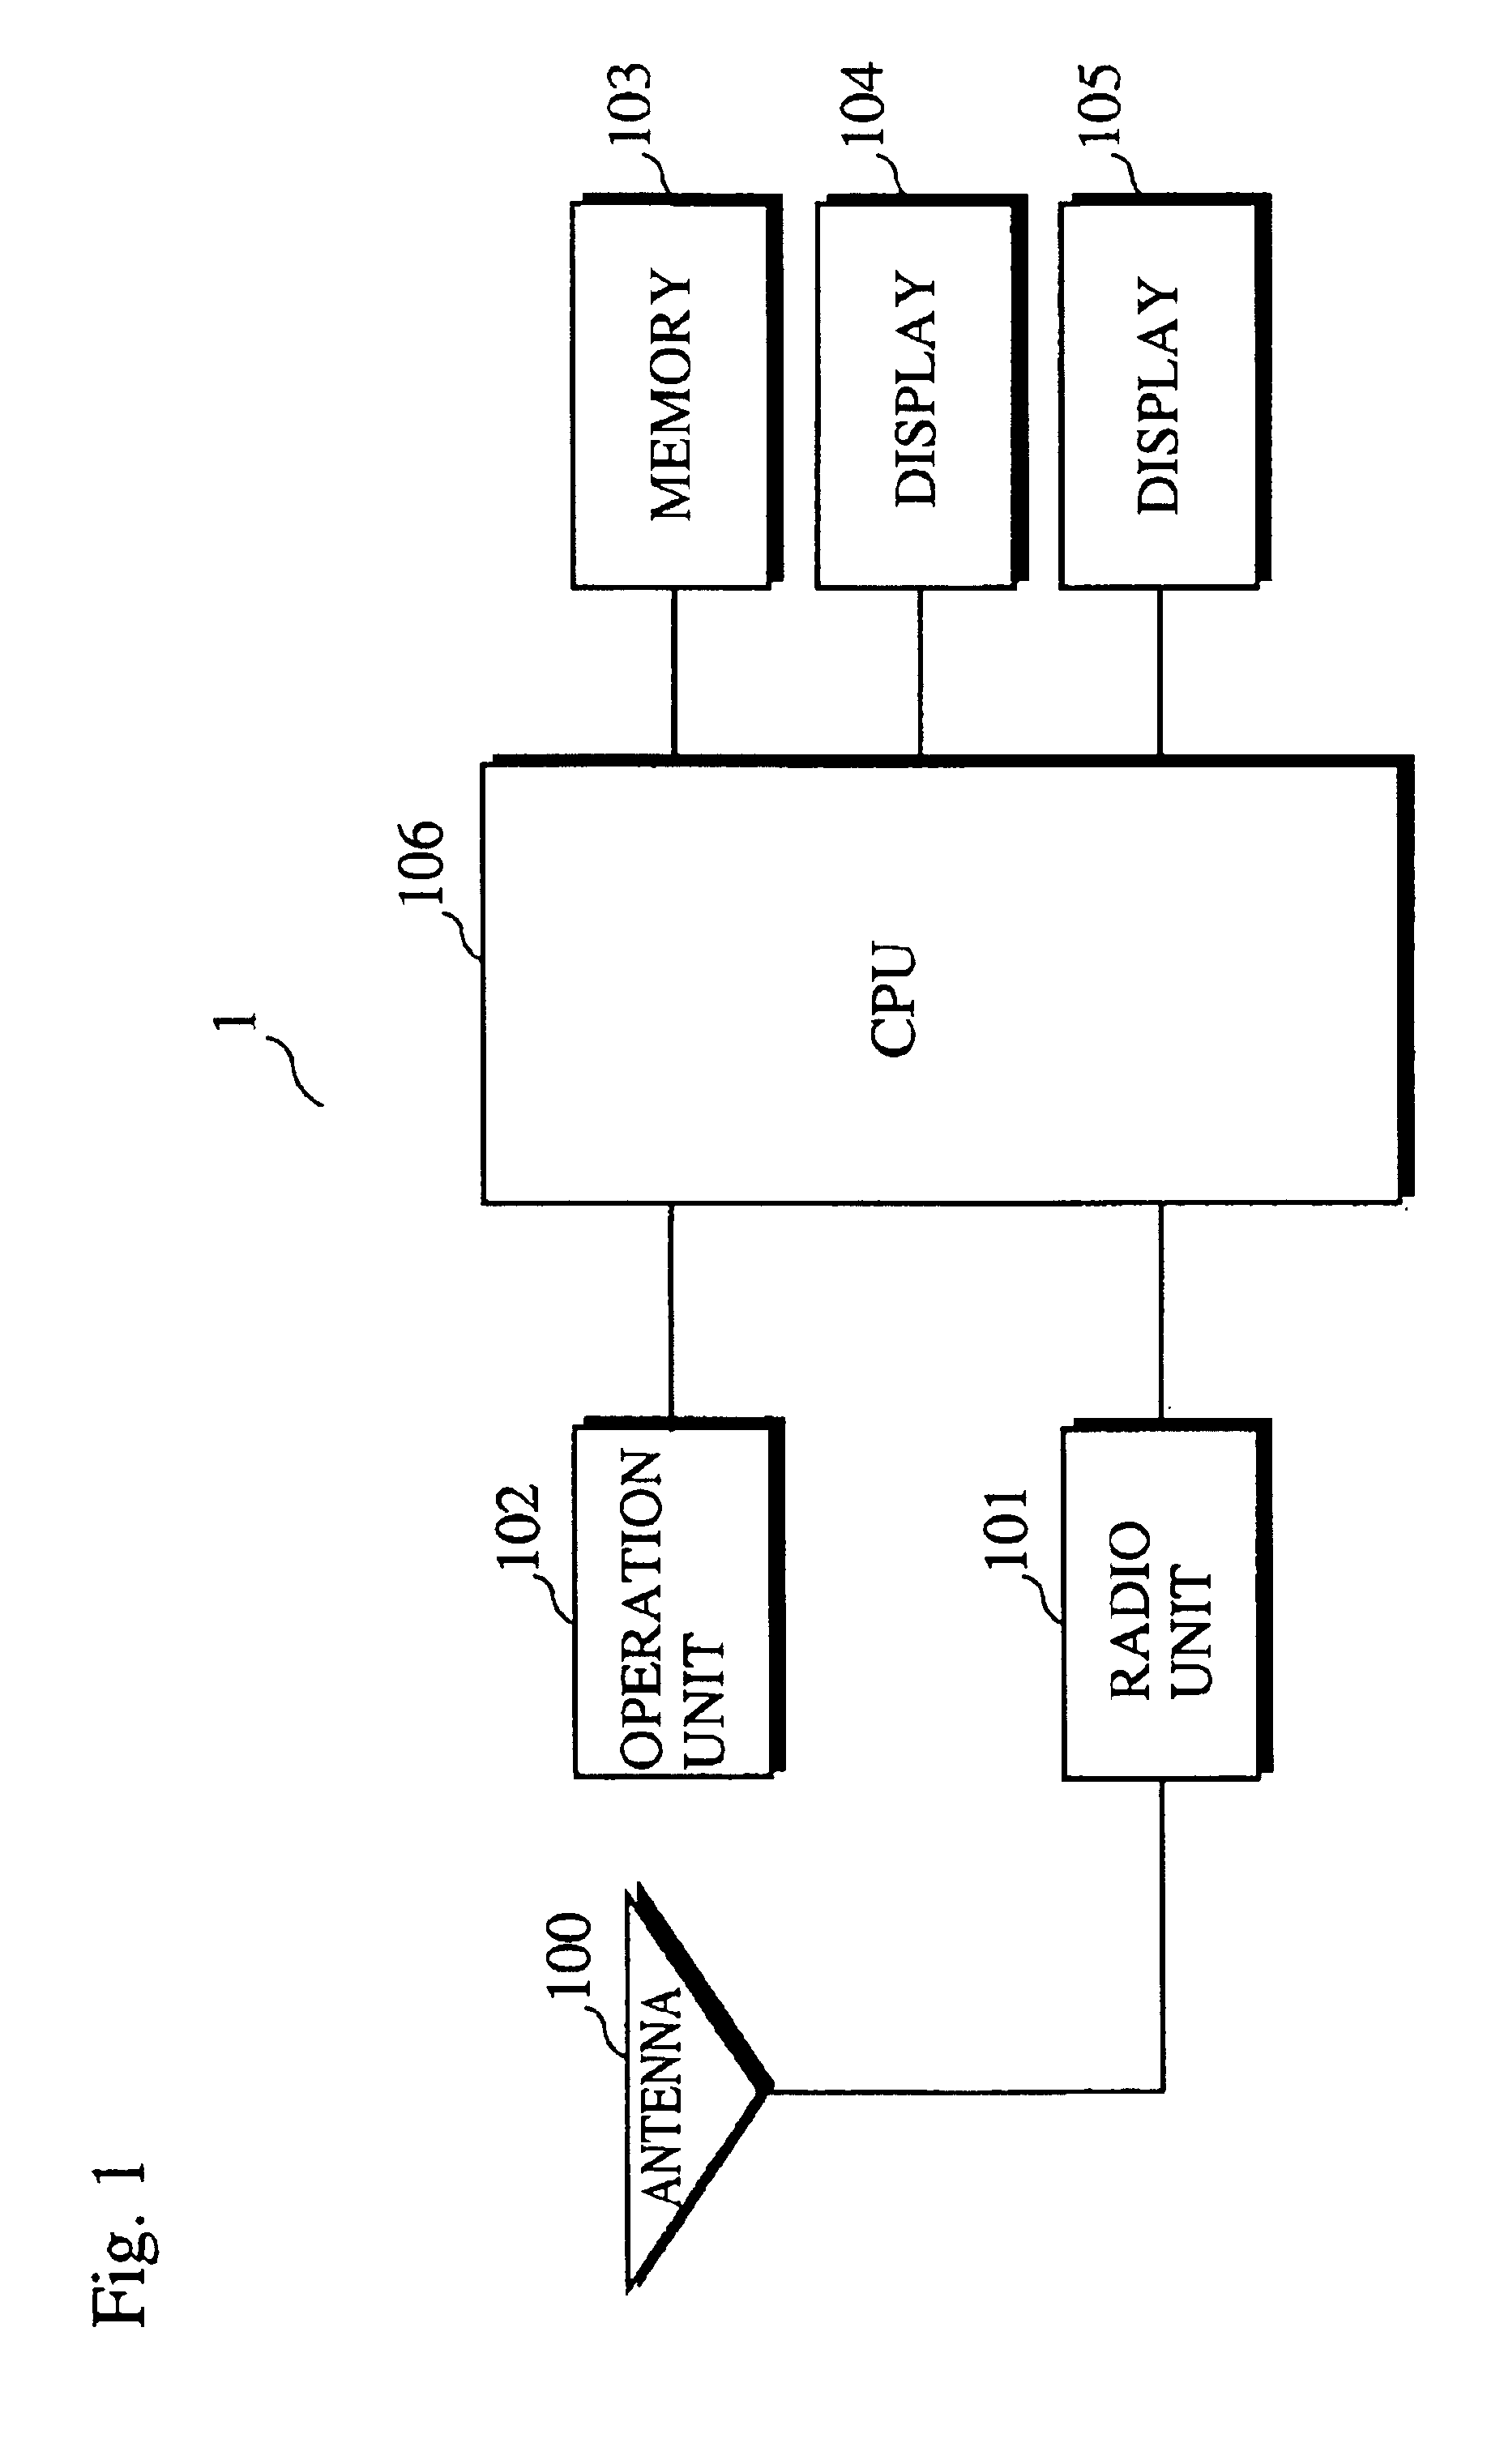 Dual display portable telephone device and allocation means for display process thereof